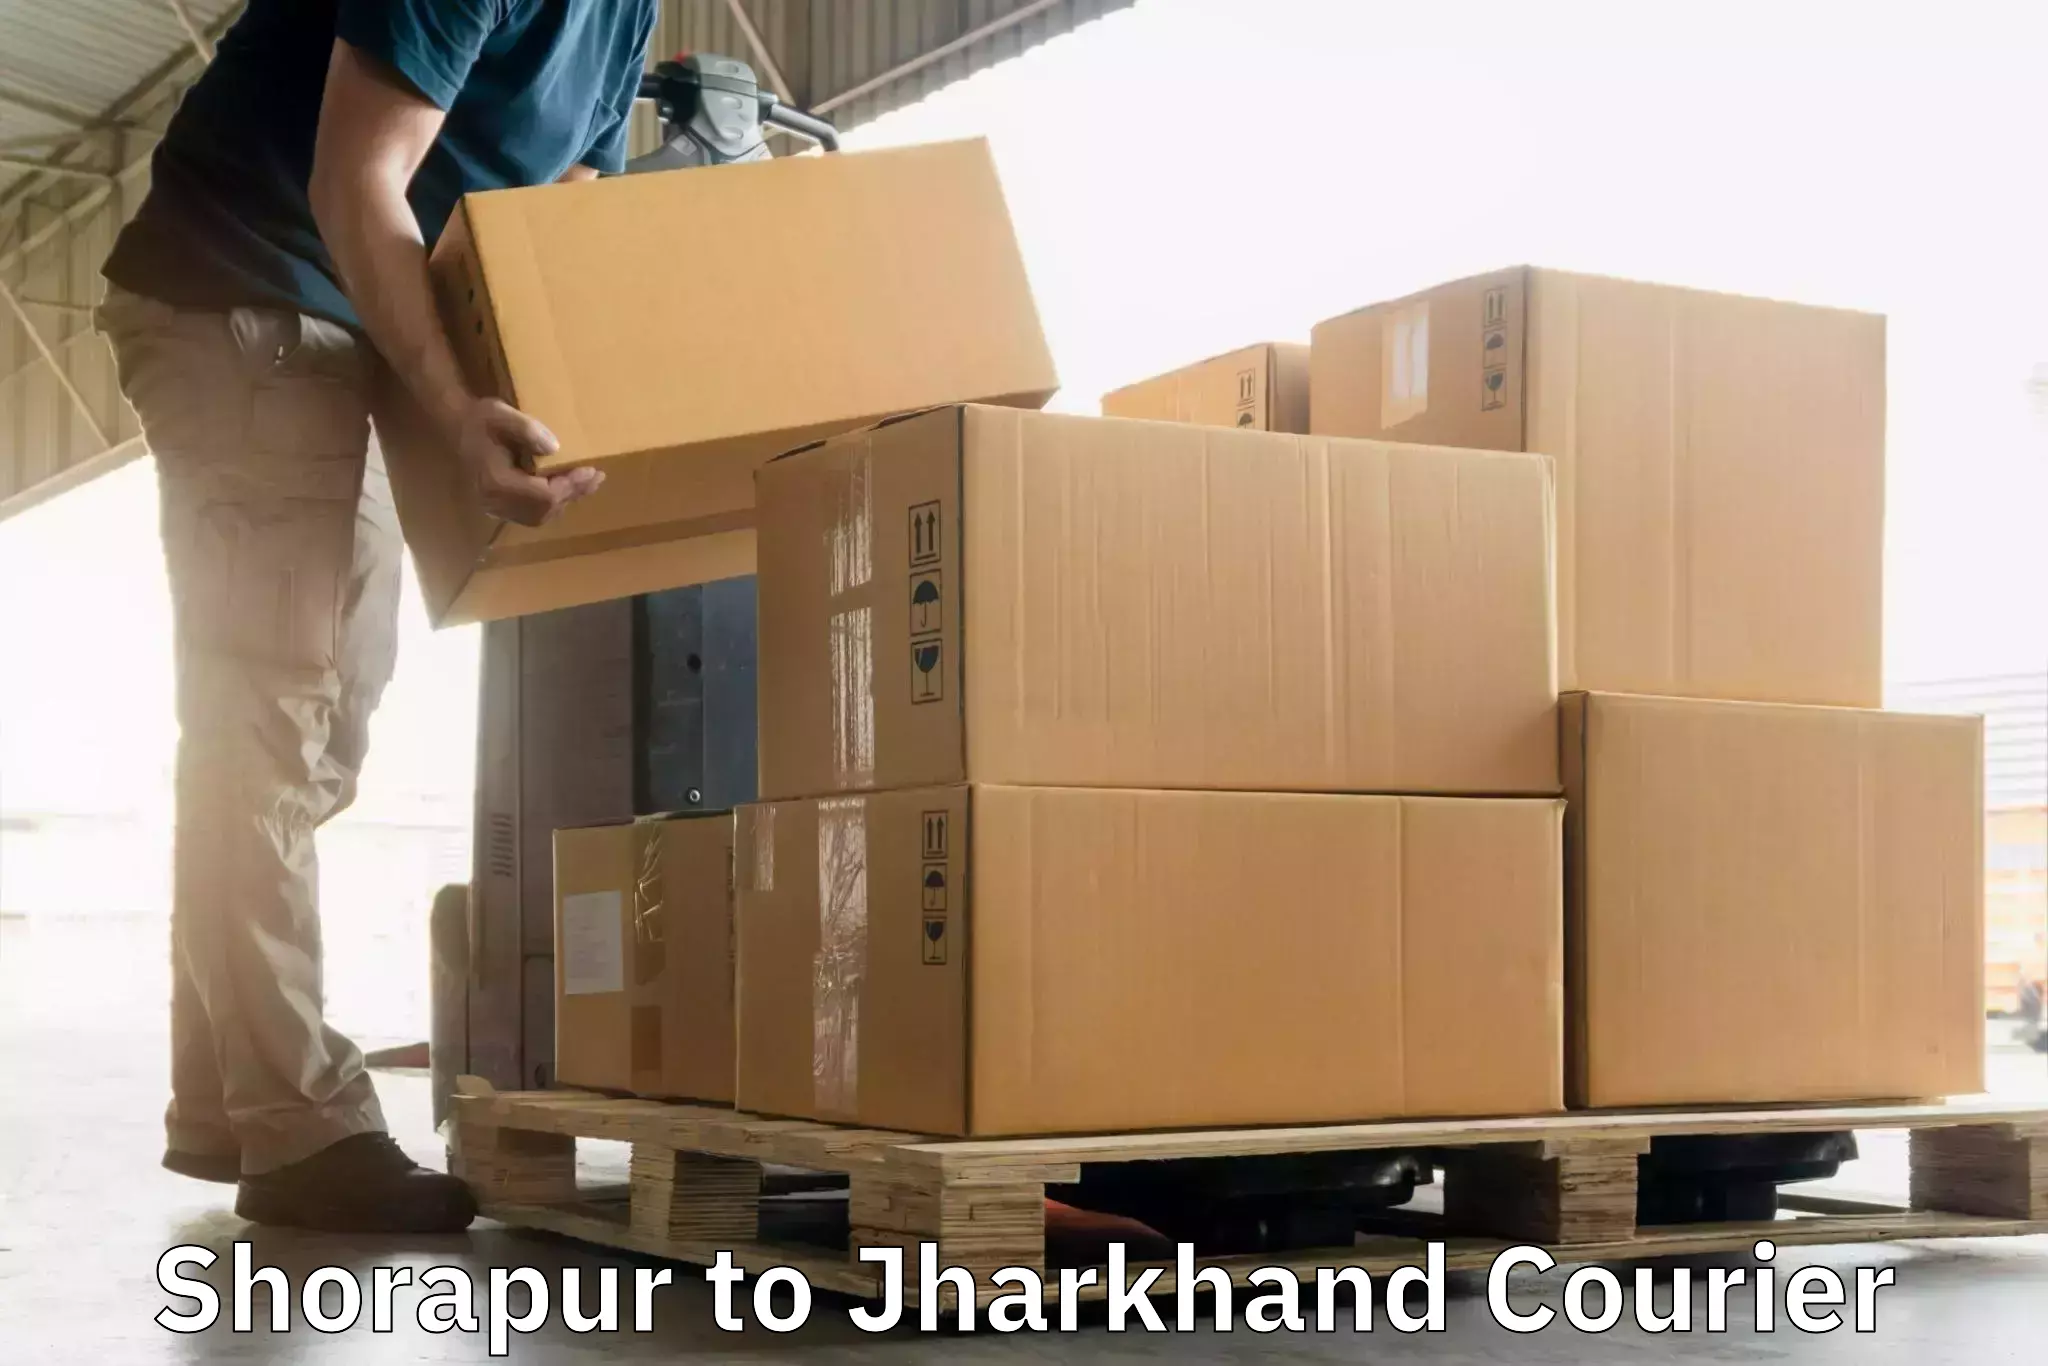 Specialized shipment handling in Shorapur to Topchanchi